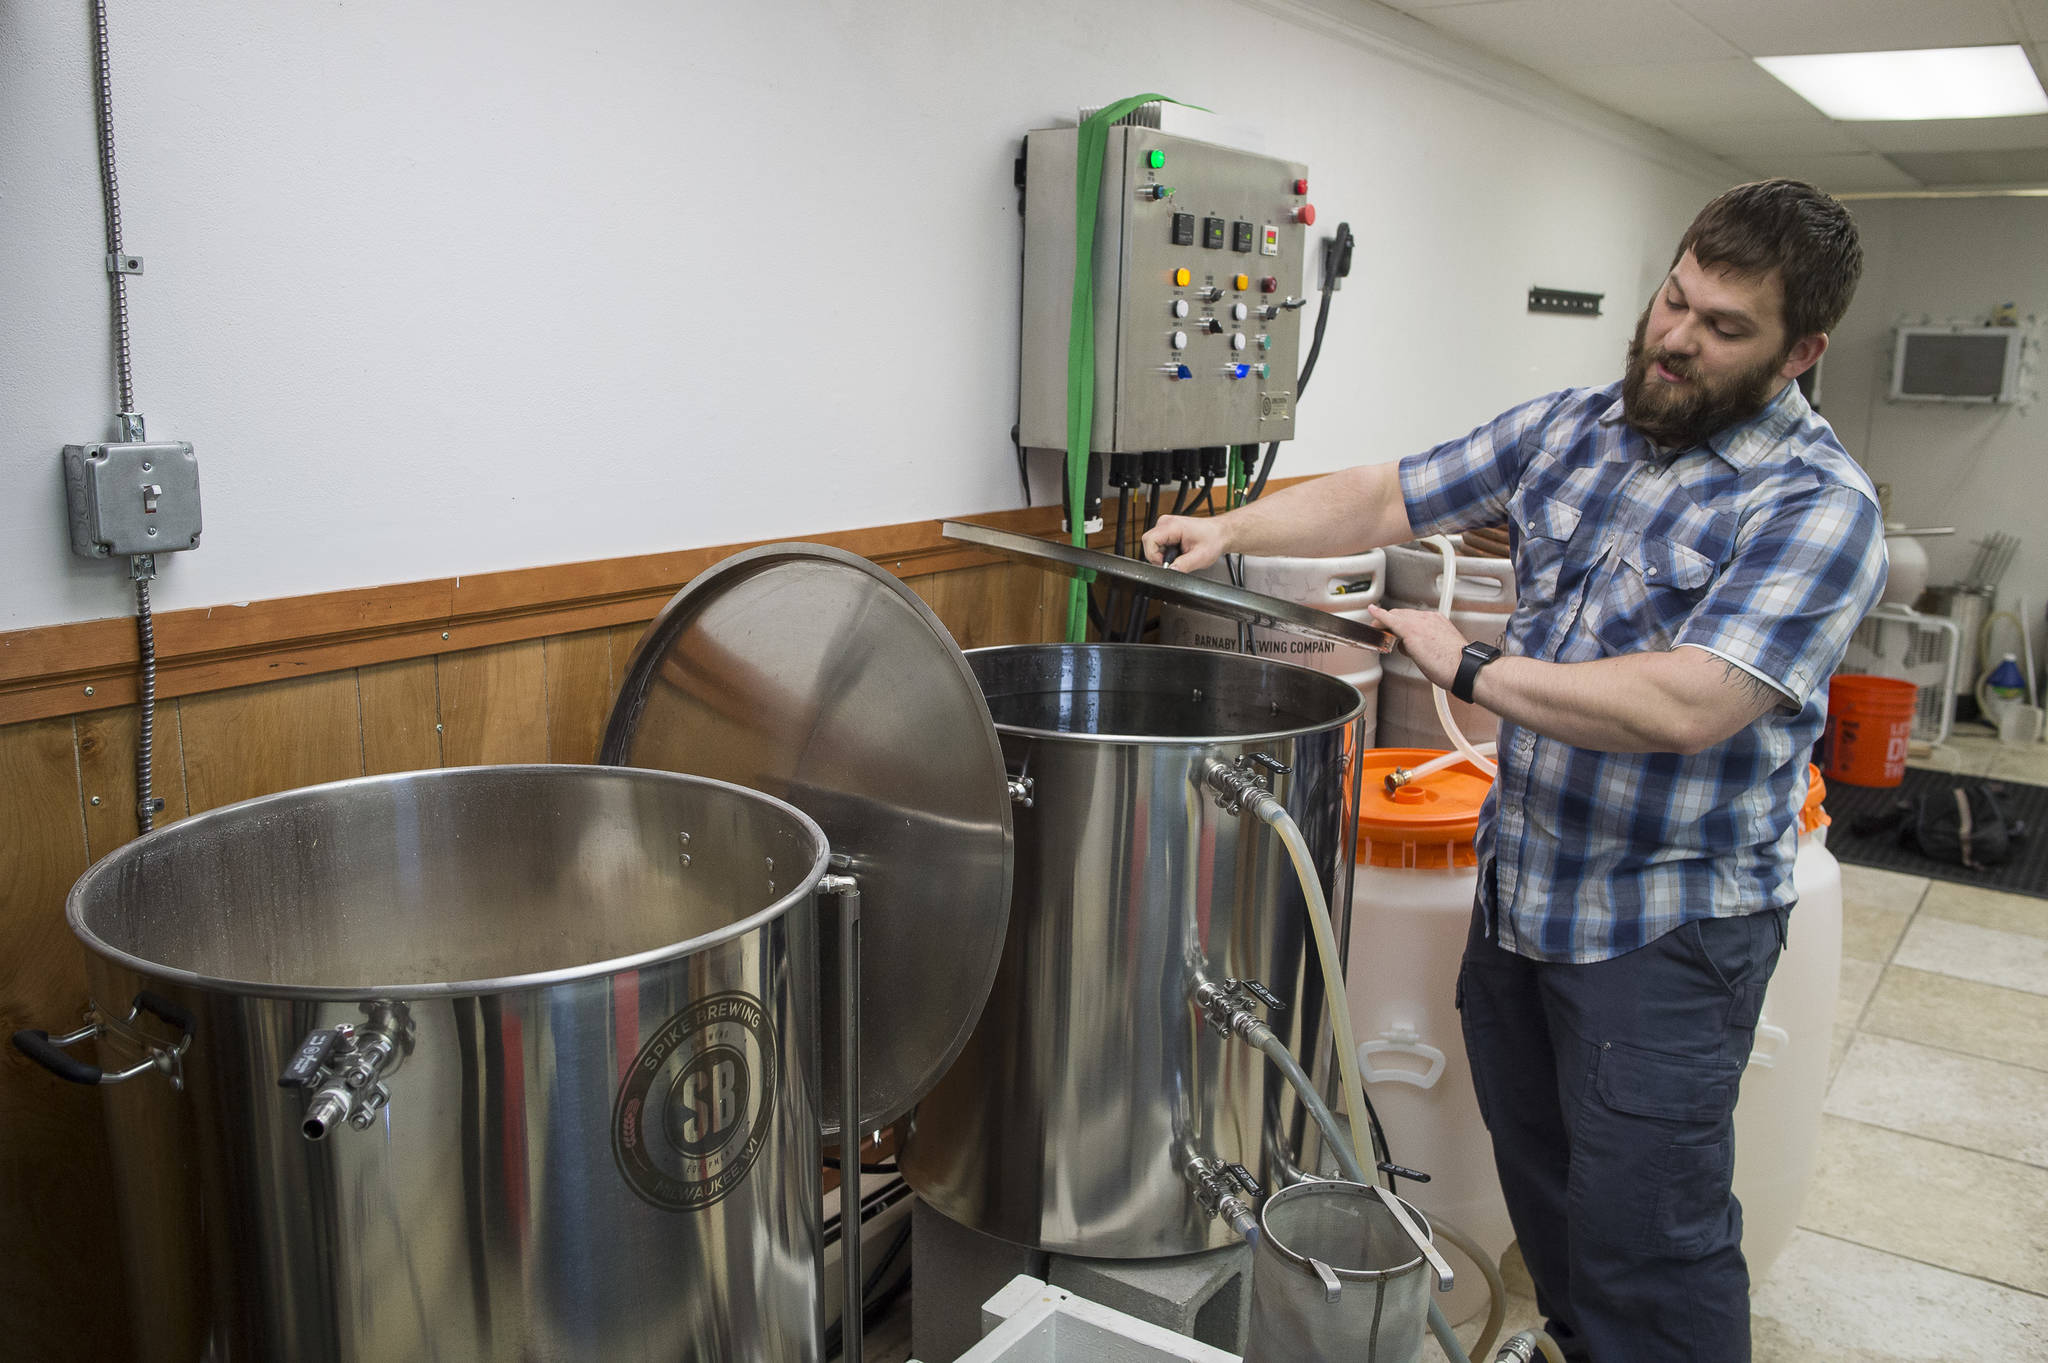 Matt Barnaby of Barnaby Brewing, talks about brewing a beer at his North Franklin location on Monday, April 9, 2018 before a fire closed the brewery. Barnaby recently won an award for its “I’ll Have Another 2018” smoked beer. (Michael Penn | Juneau Empire)